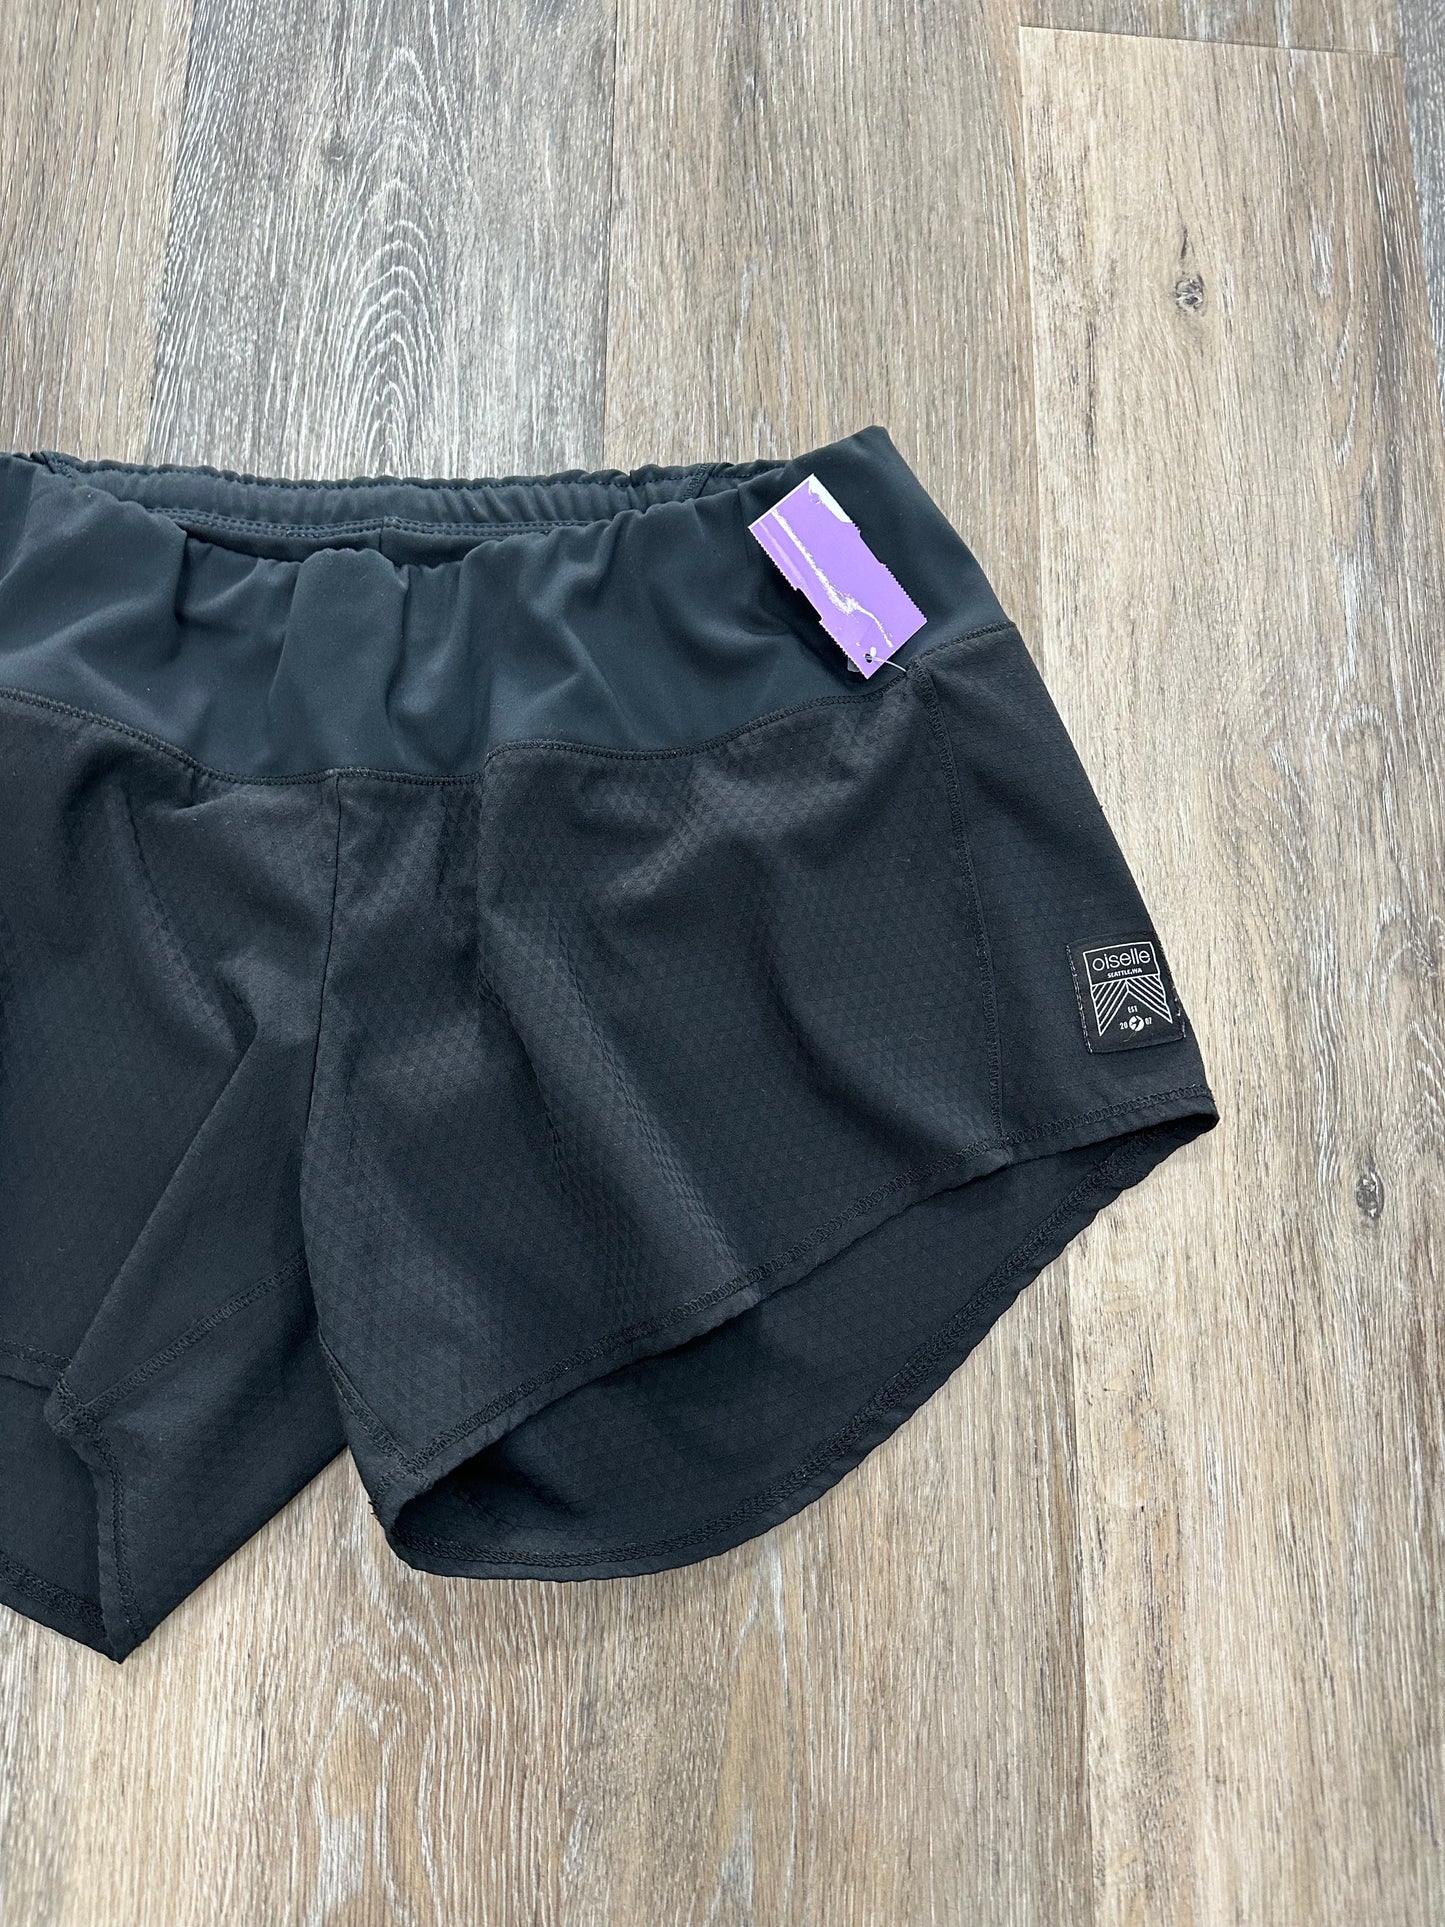 Shorts By Oiselle  Size: 8